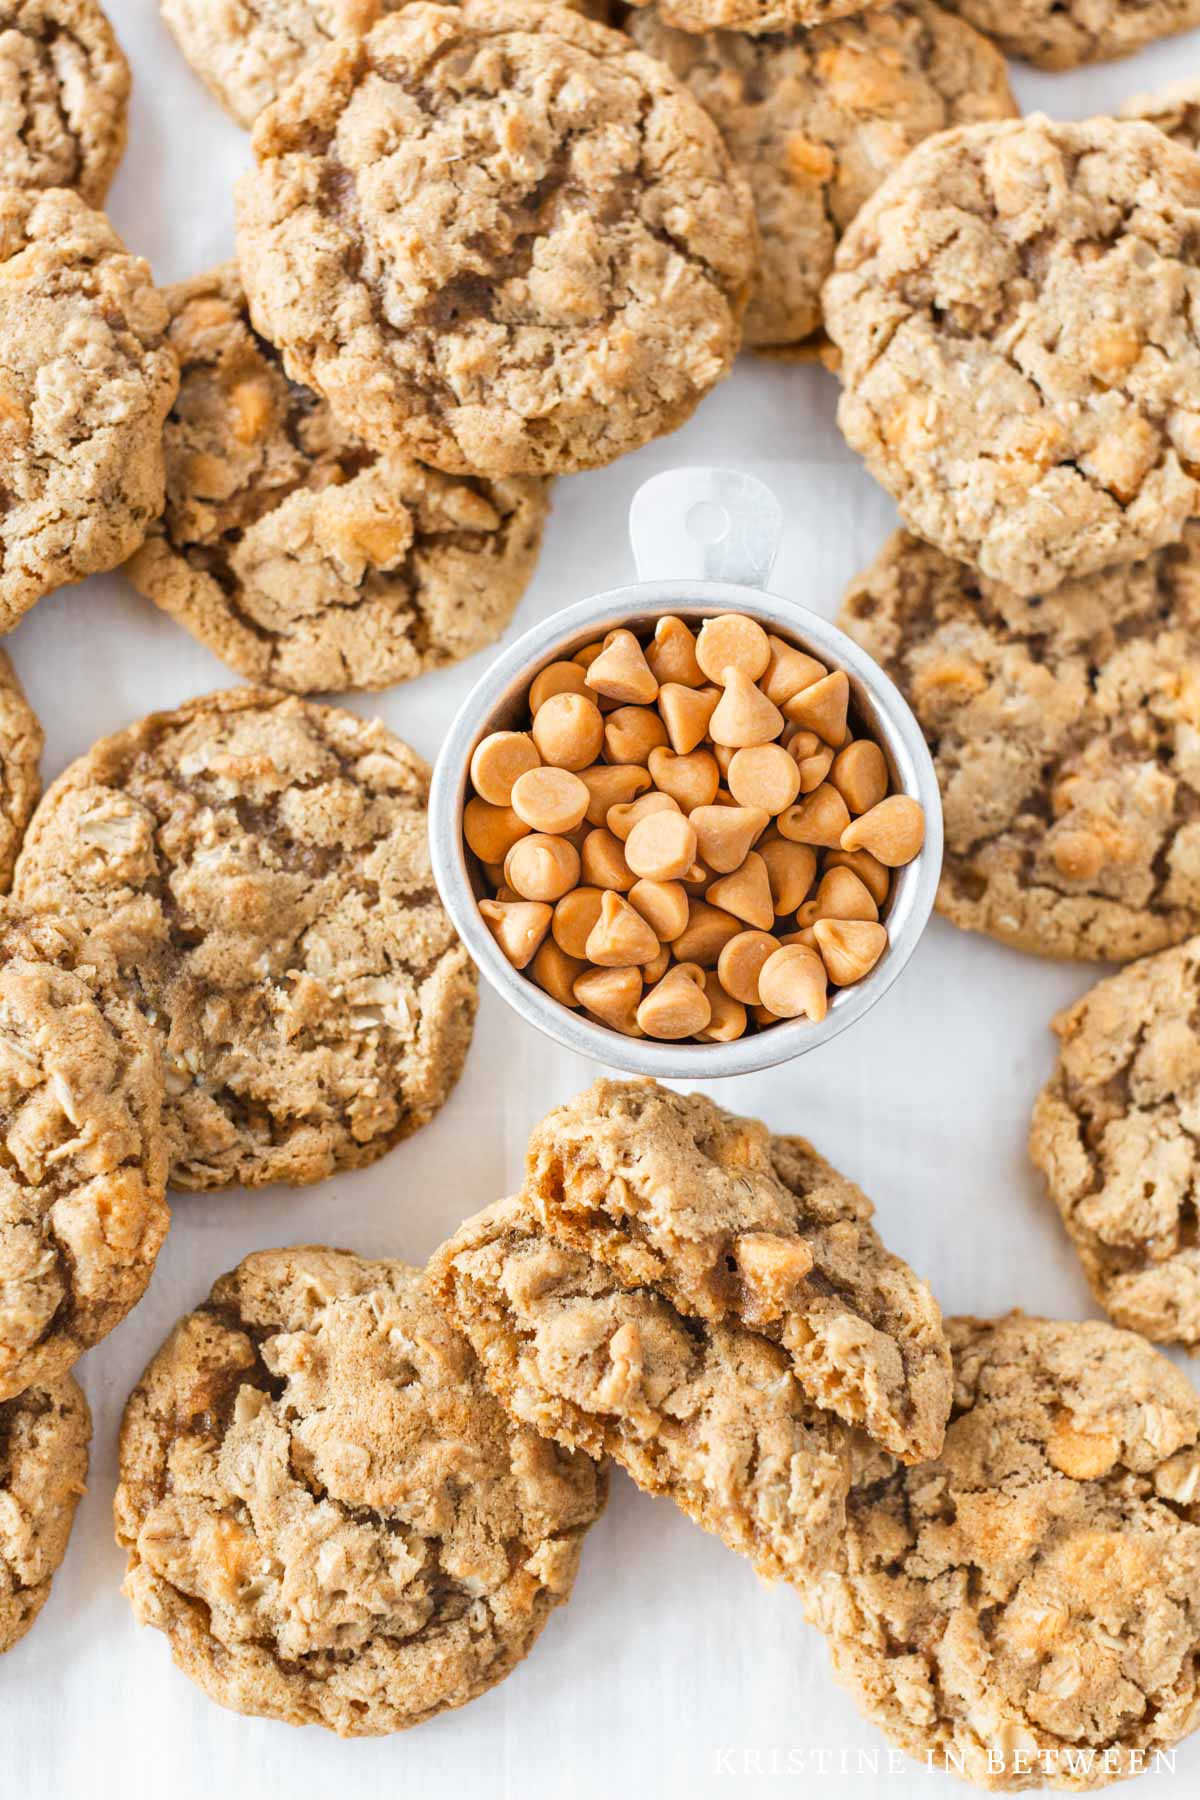 Butterscotch oatmeal cookies laying on a cookie sheet with a small bowl of butterscotch chips.